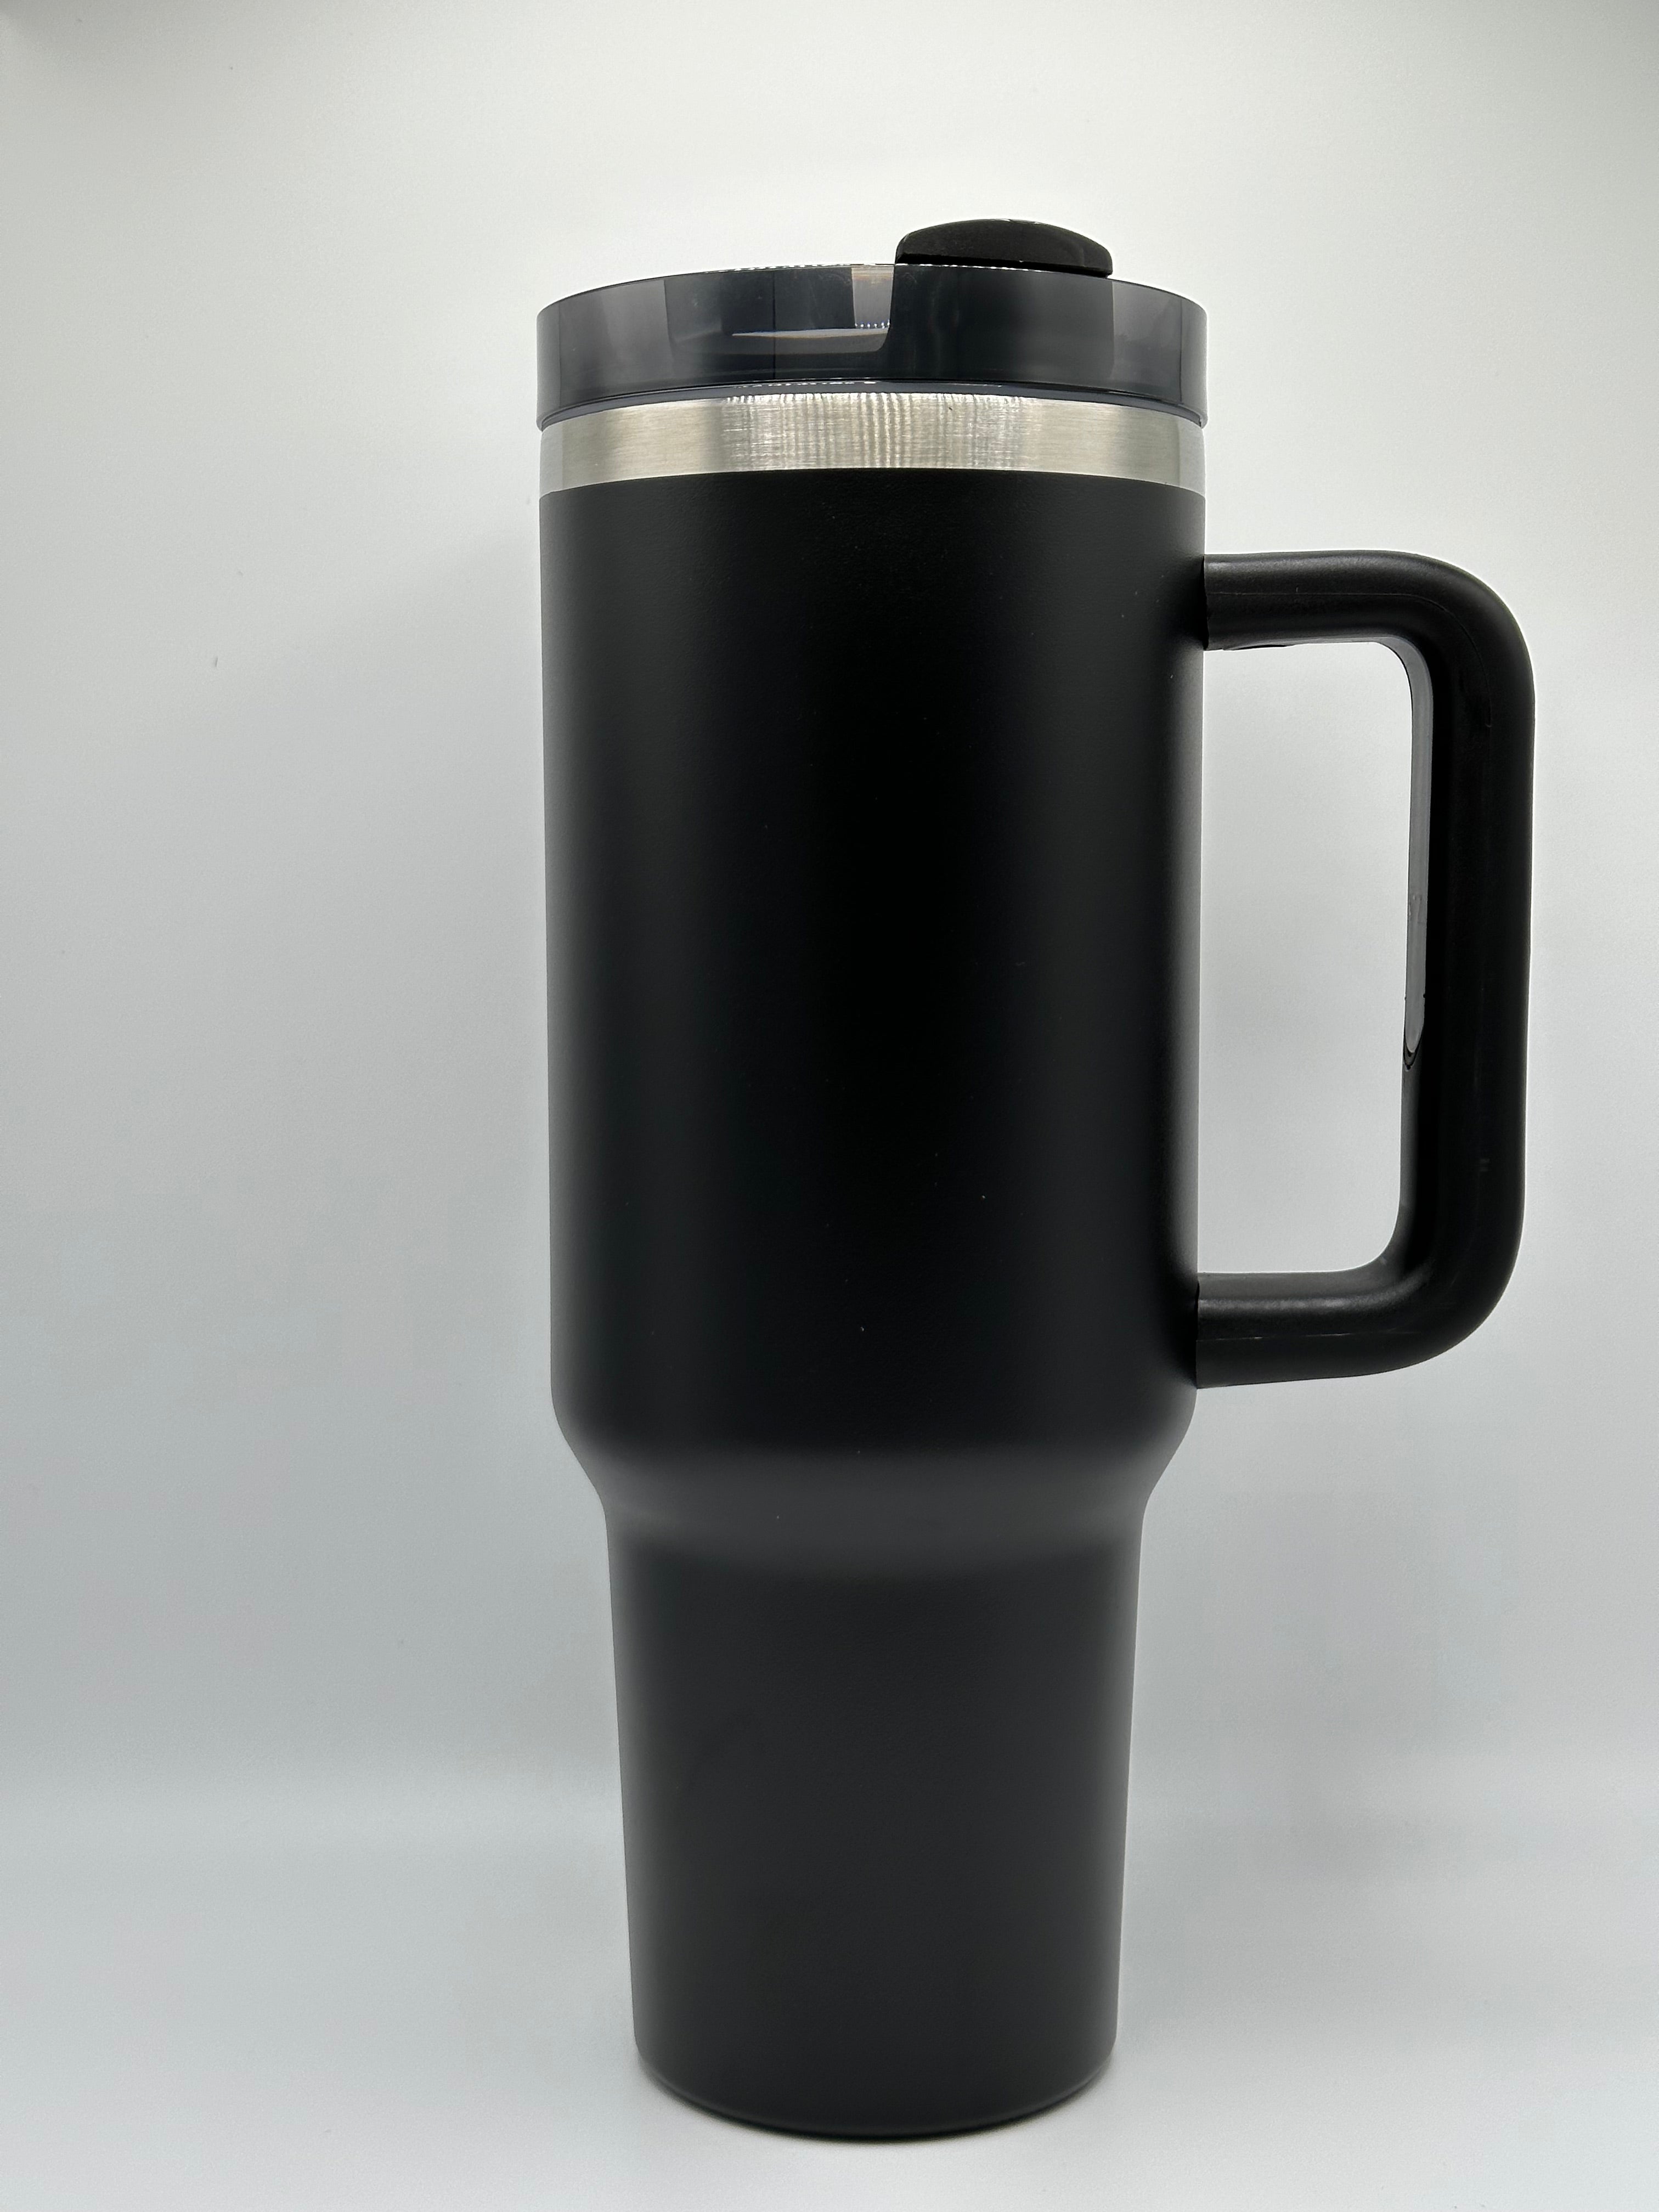 Insulated Espresso Cup by Coldest Stealth Black